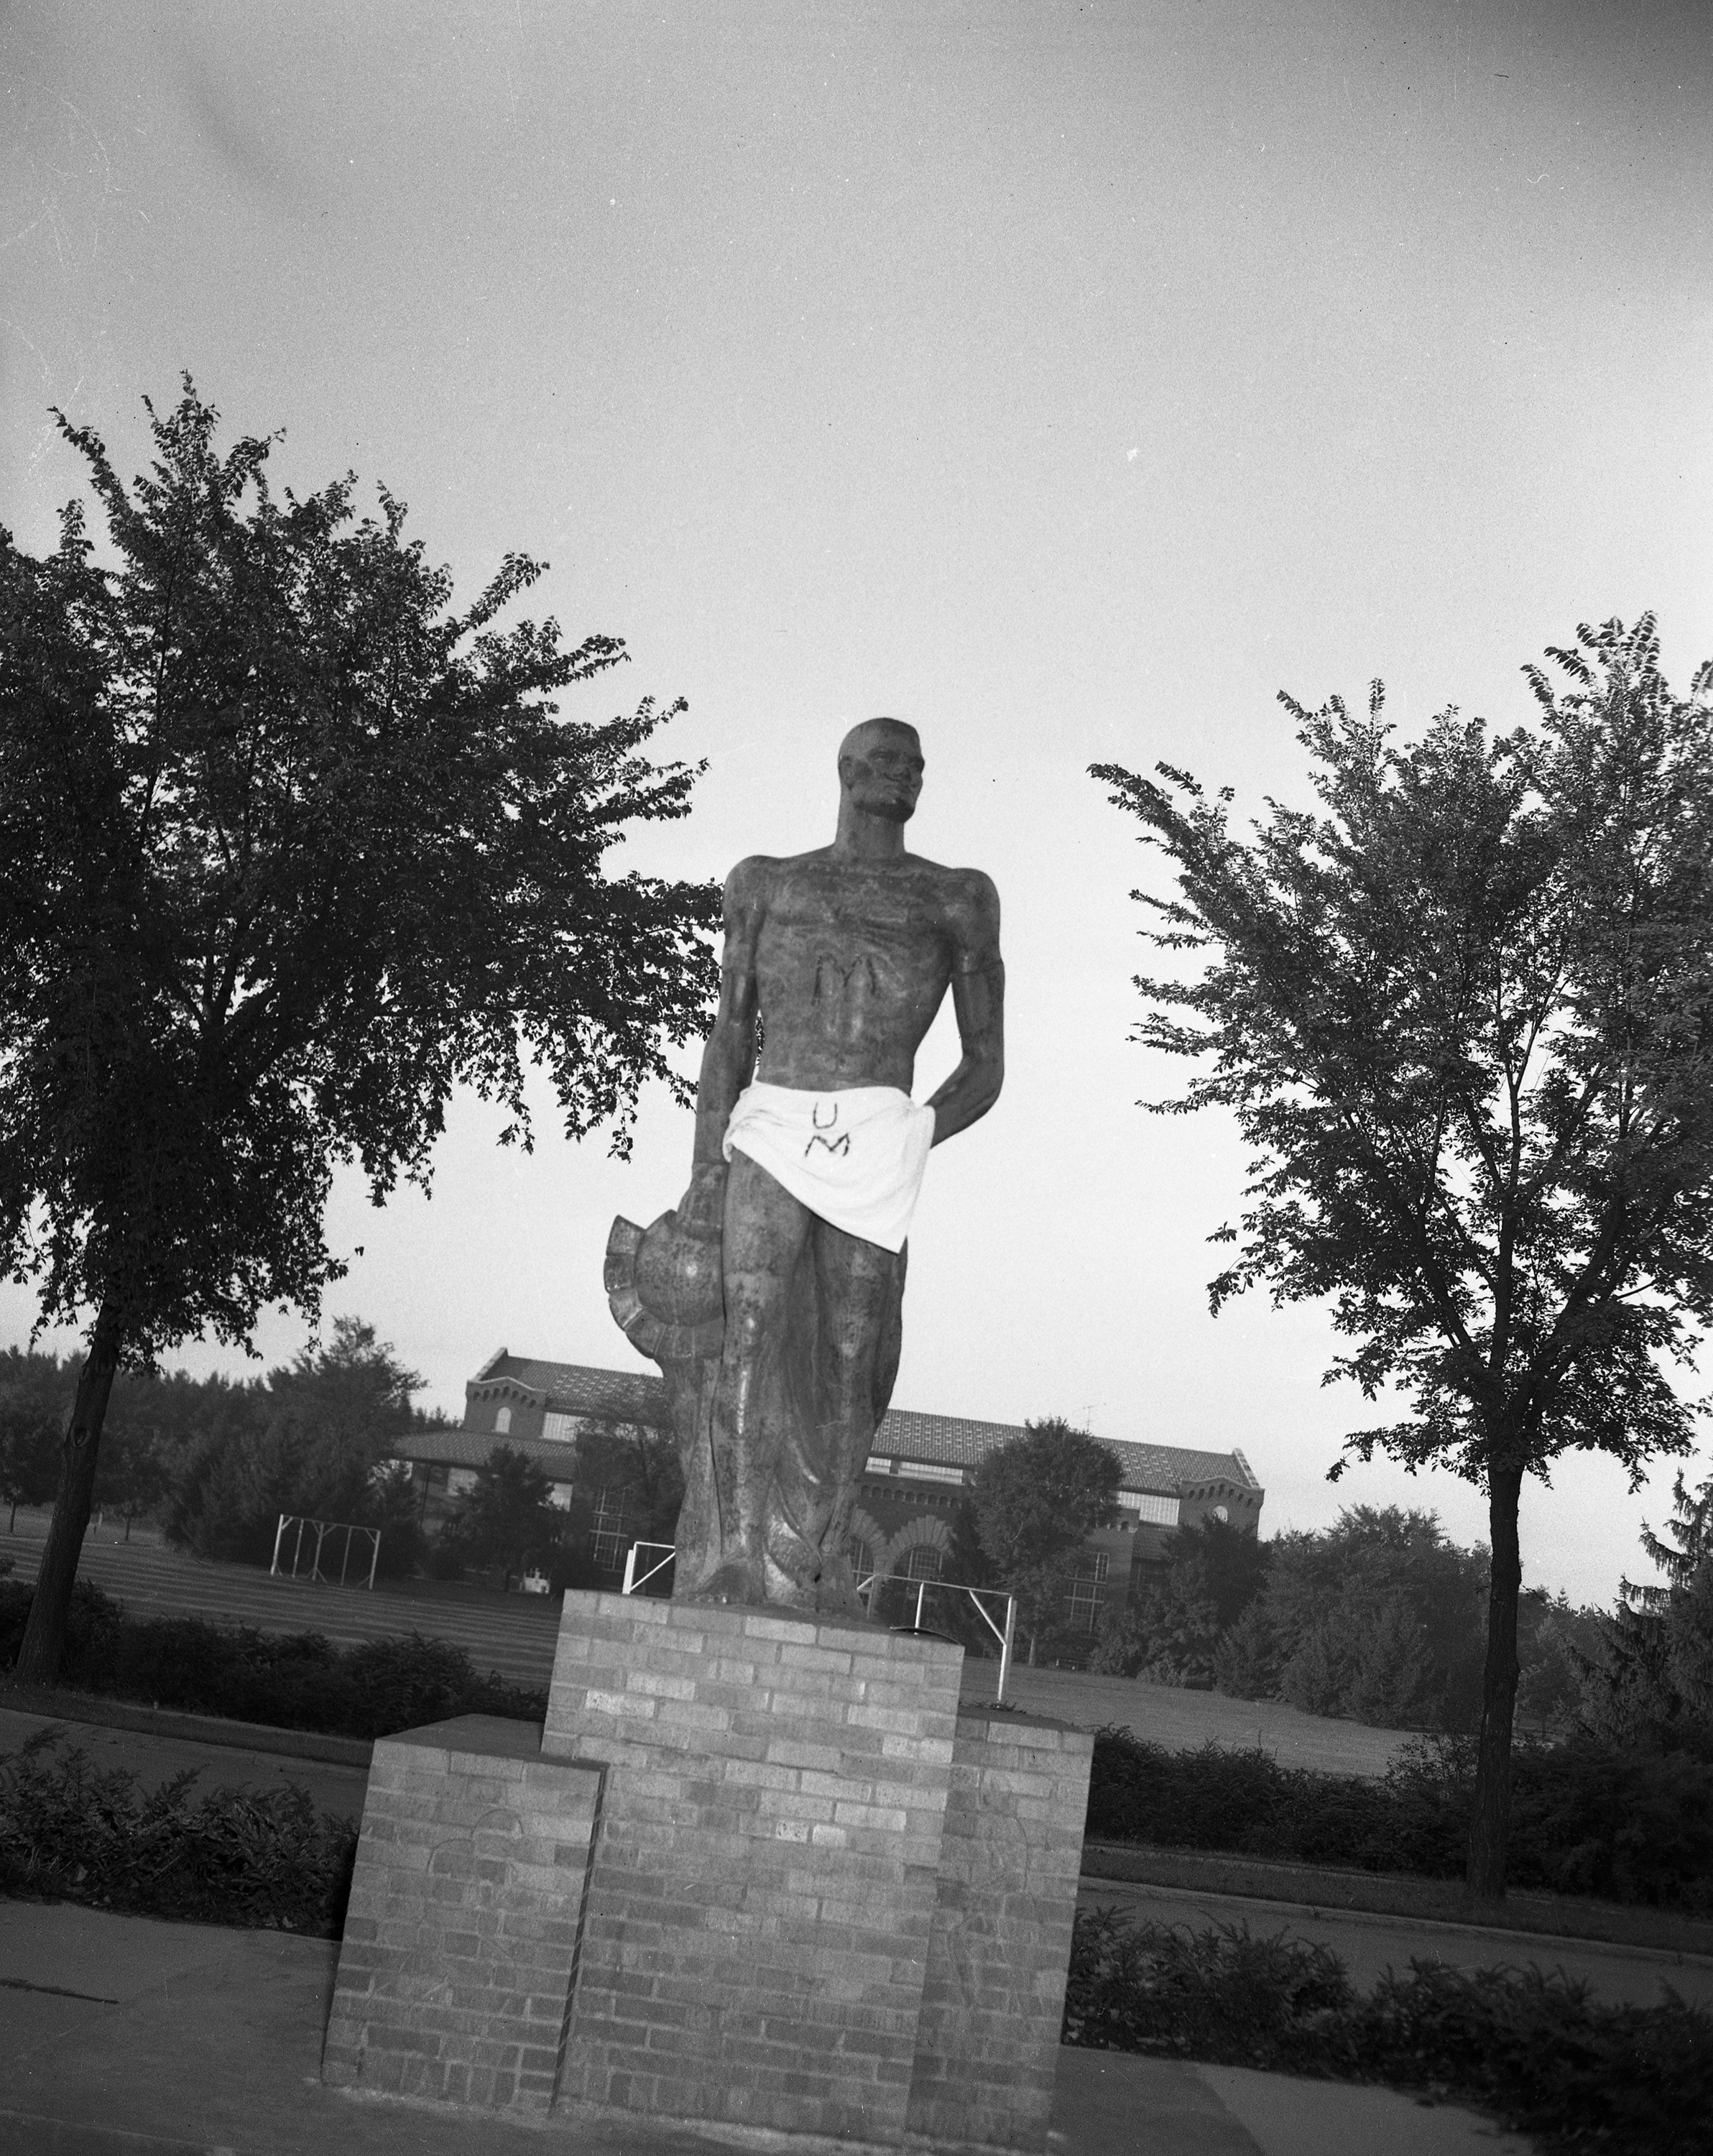 Sparty graffitied with U of M colors, Circa 1952